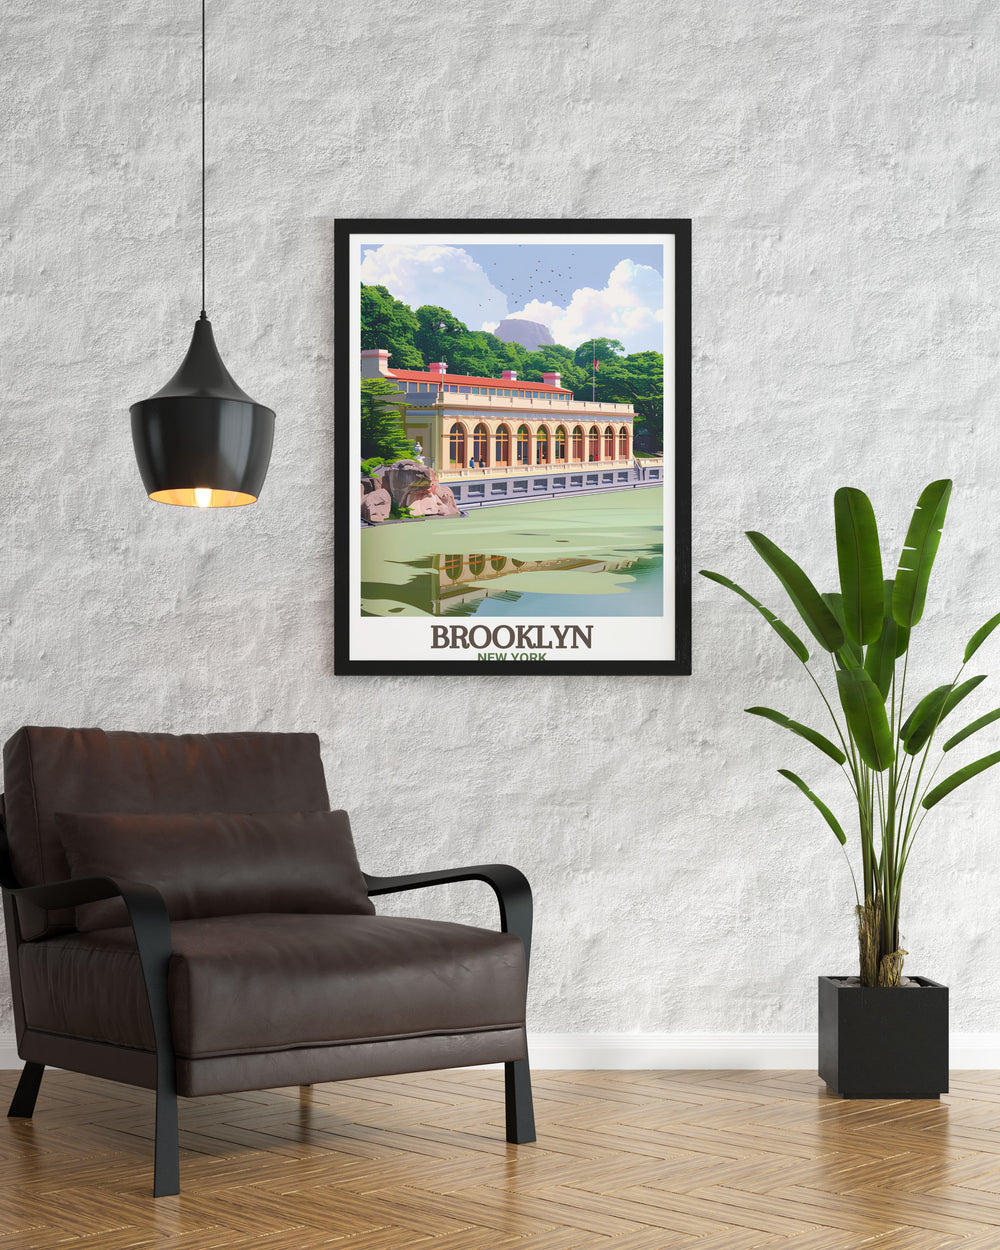 Stunning Prospect Park wall art showcasing the lush greenery and historic charm of the beloved New York park an excellent addition to any home decor bringing a touch of tranquility to your space